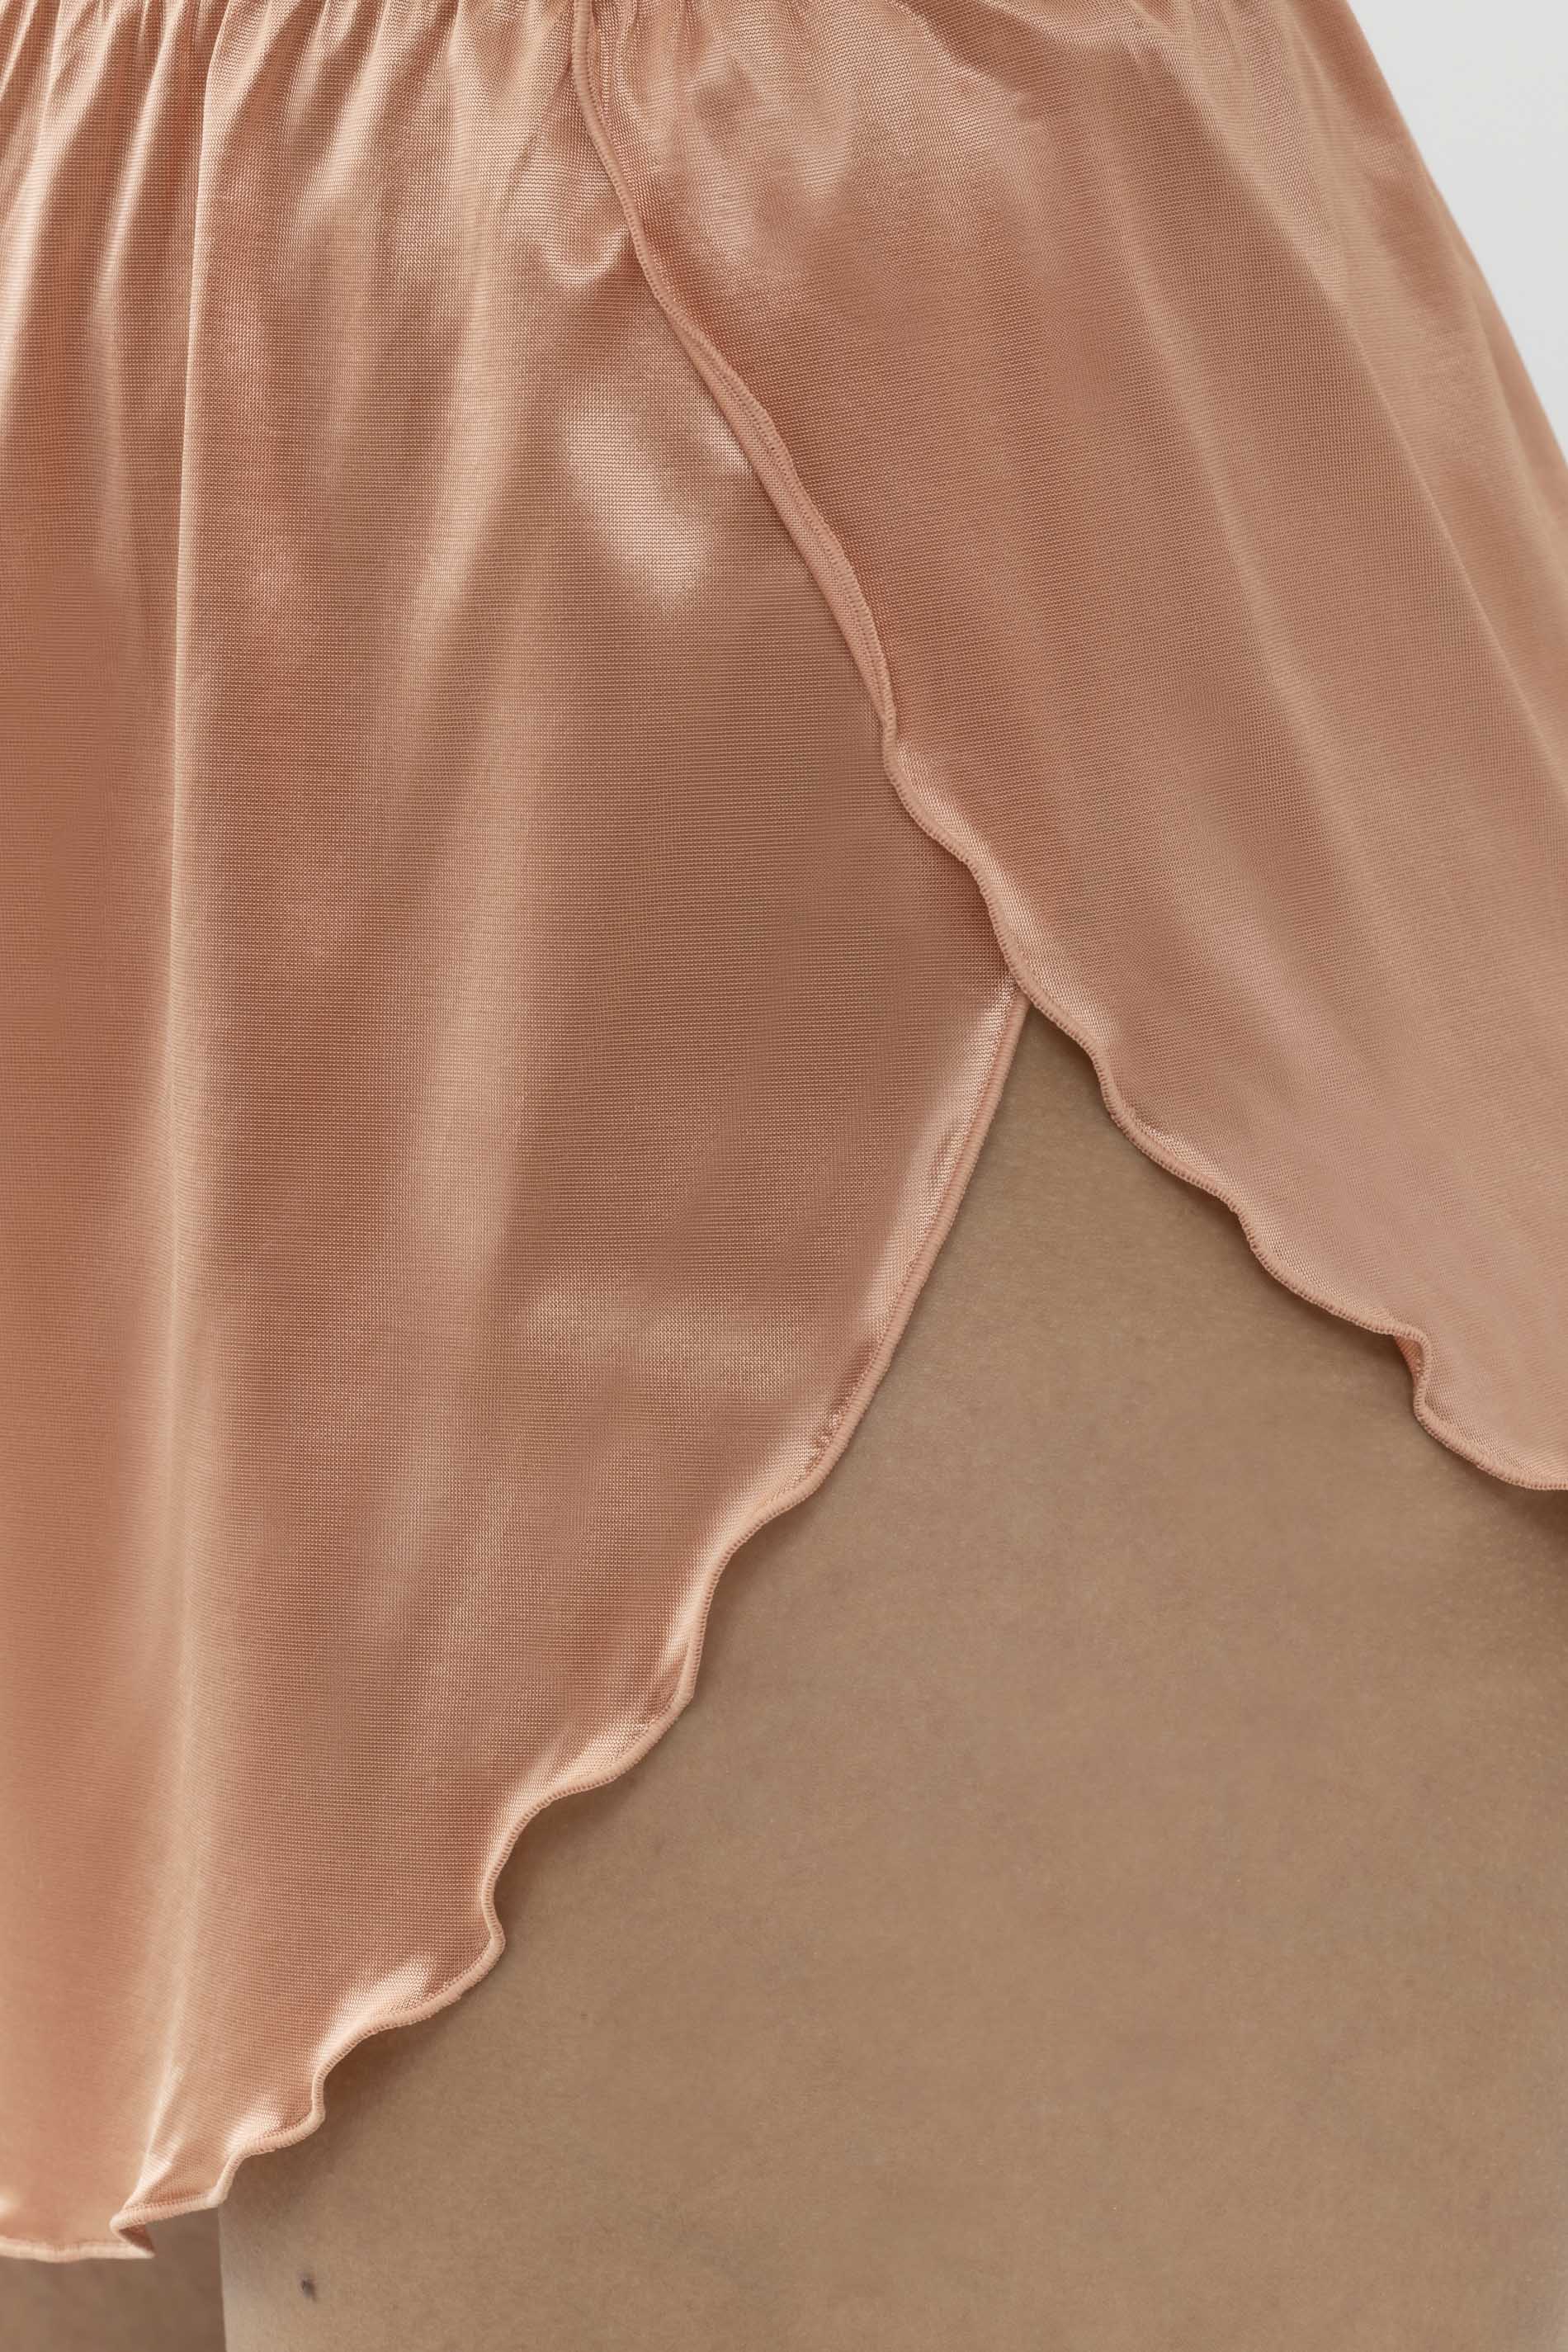 French knickers Serie Coco Detail View 02 | mey®